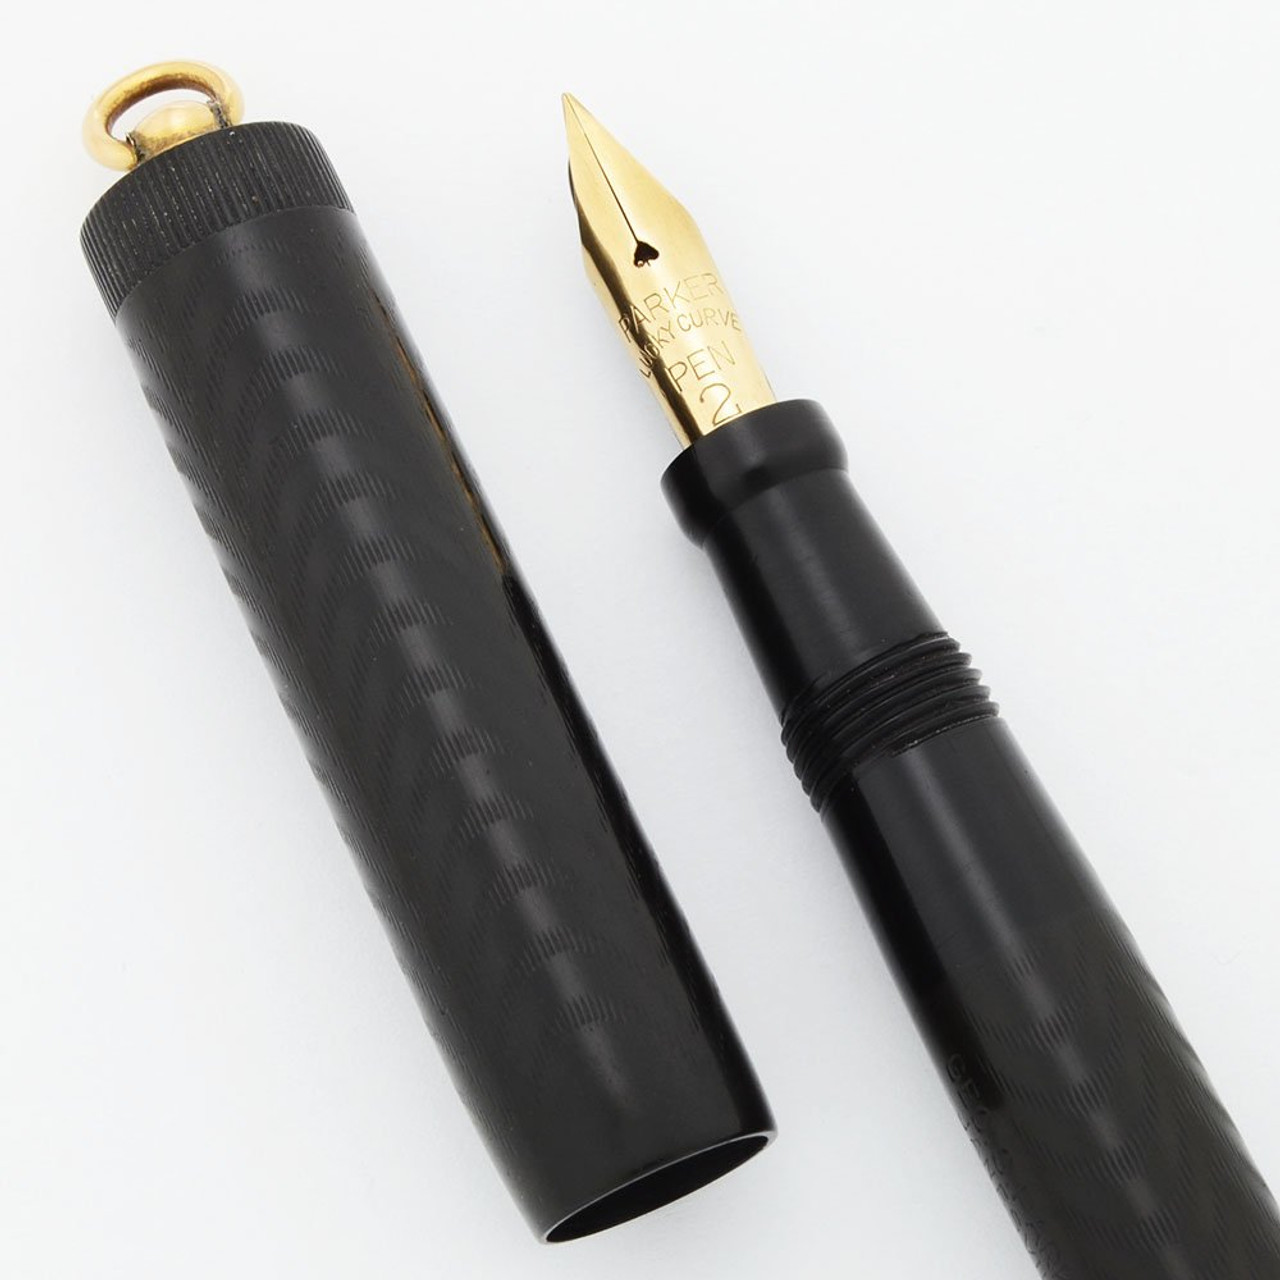 Parker Jack Knife Safety Fountain Pen - BCHR, Ring Top, Fine Full Flex Lucky Curve #2 Nib (Excellent, Restored)